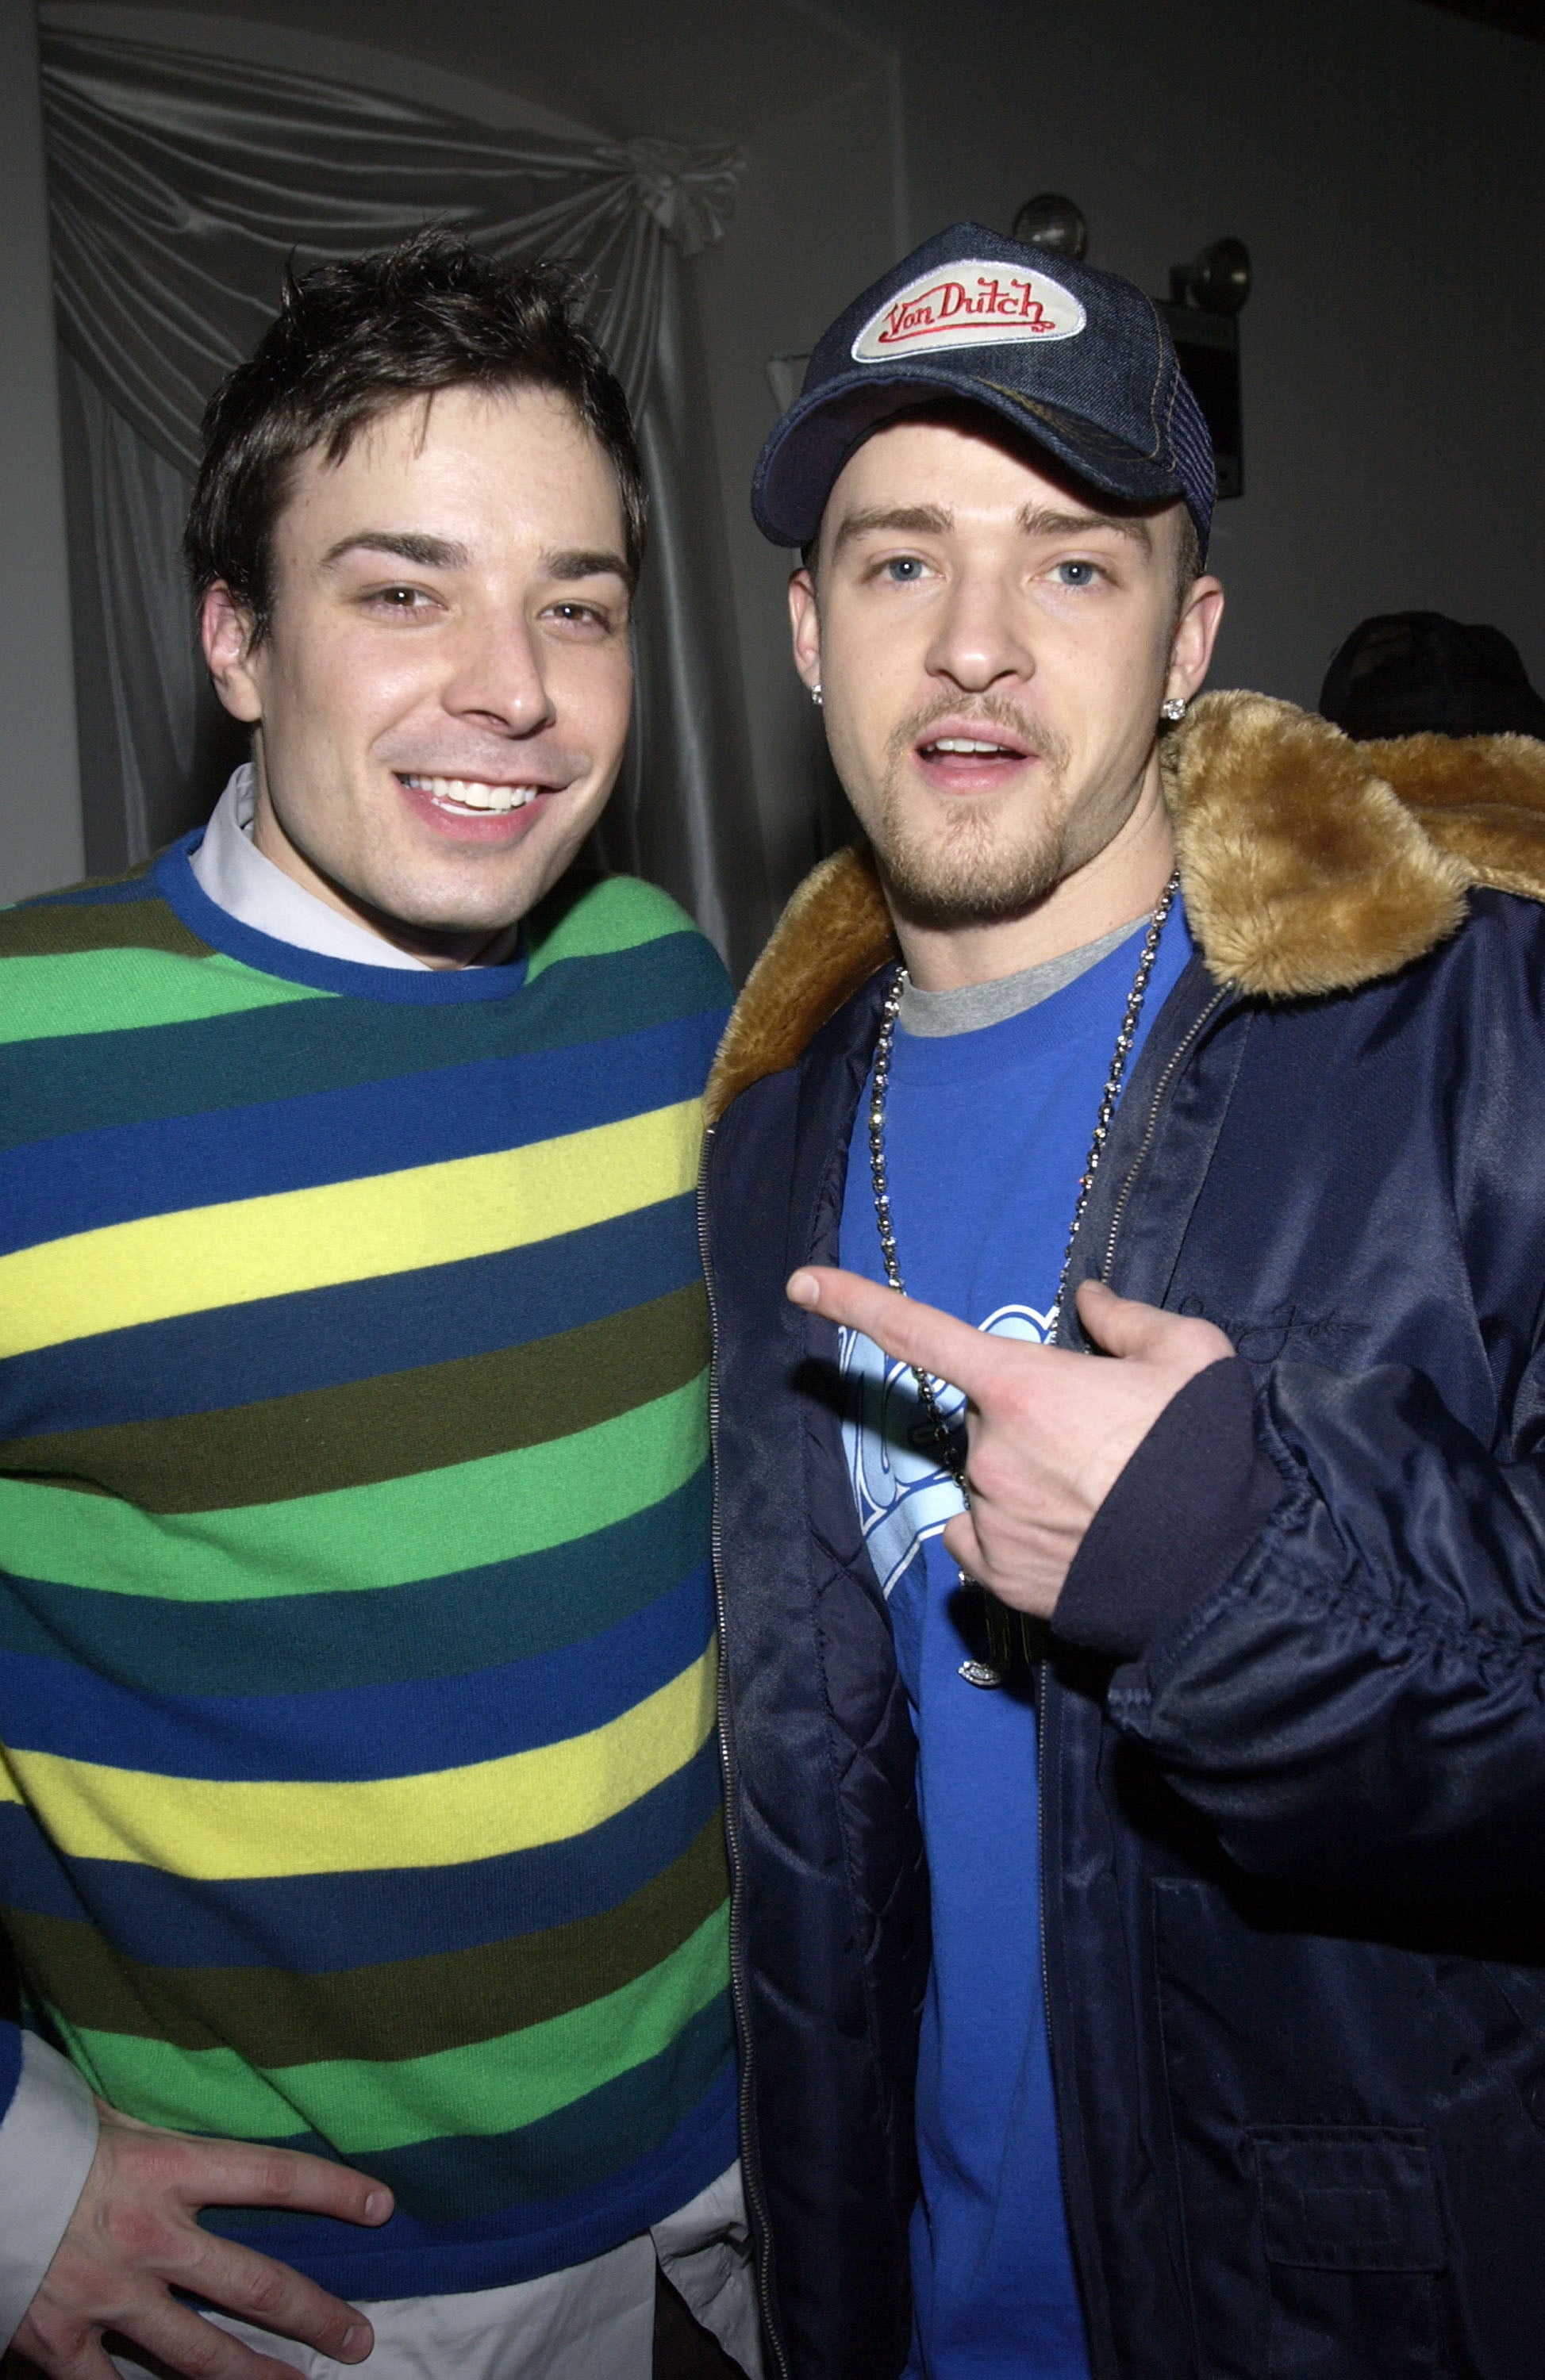 How Did Justin Timberlake and Jimmy Fallon Meet?